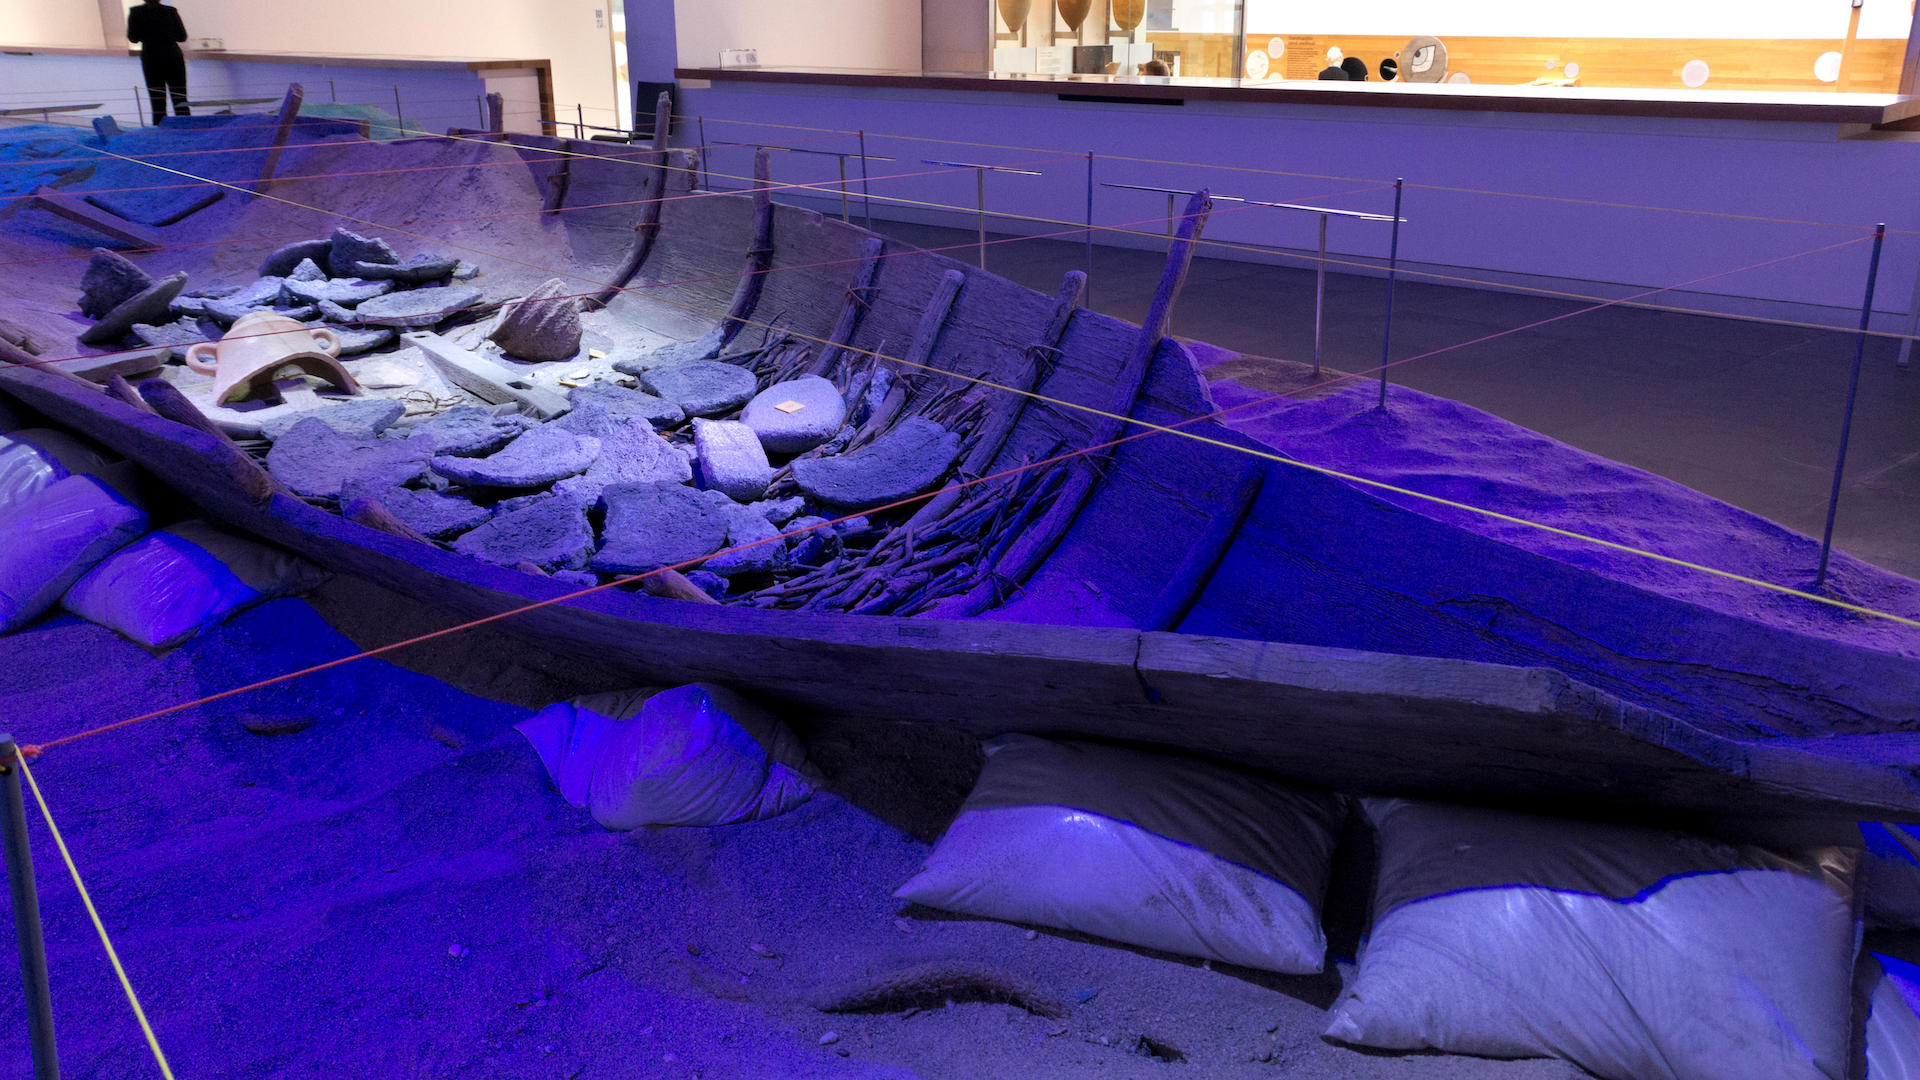 The remains of the mazarron 2 shipwreck in a museum